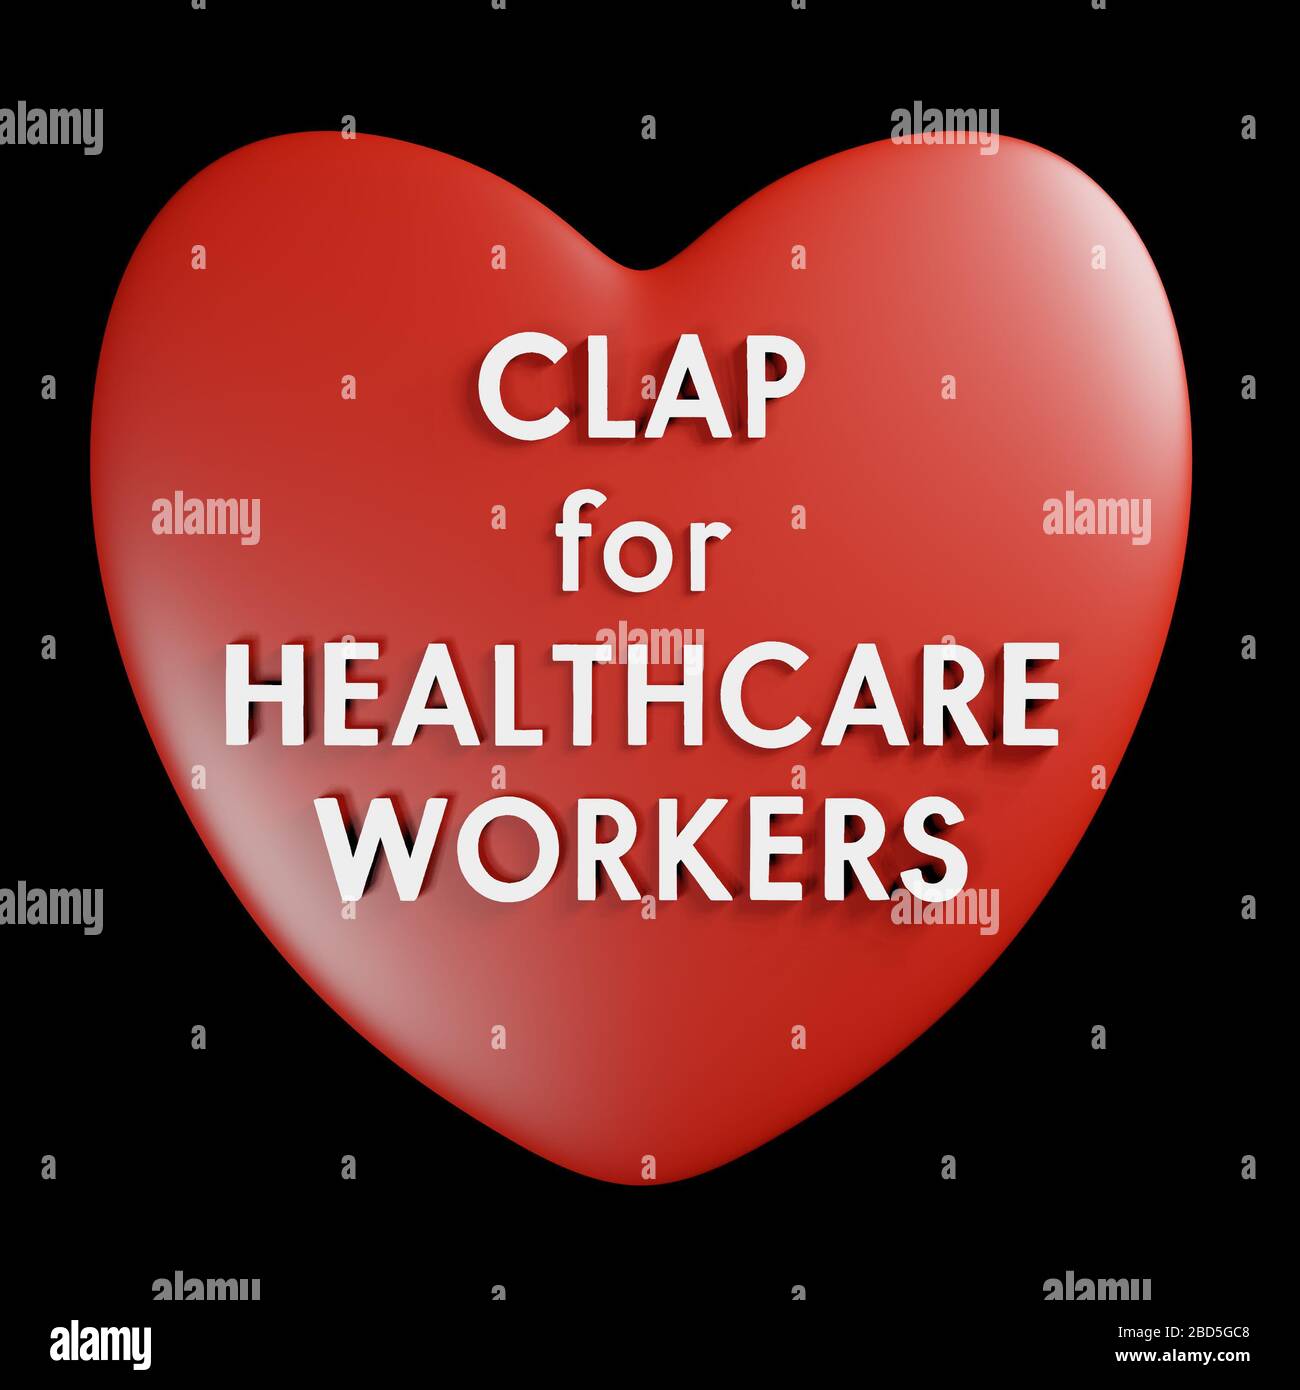 Thank You Clap For Healthcare Workers banner, appreciation of the effort of medical healthcare workers during the Covid-19 Coronavirus pandemic Stock Photo